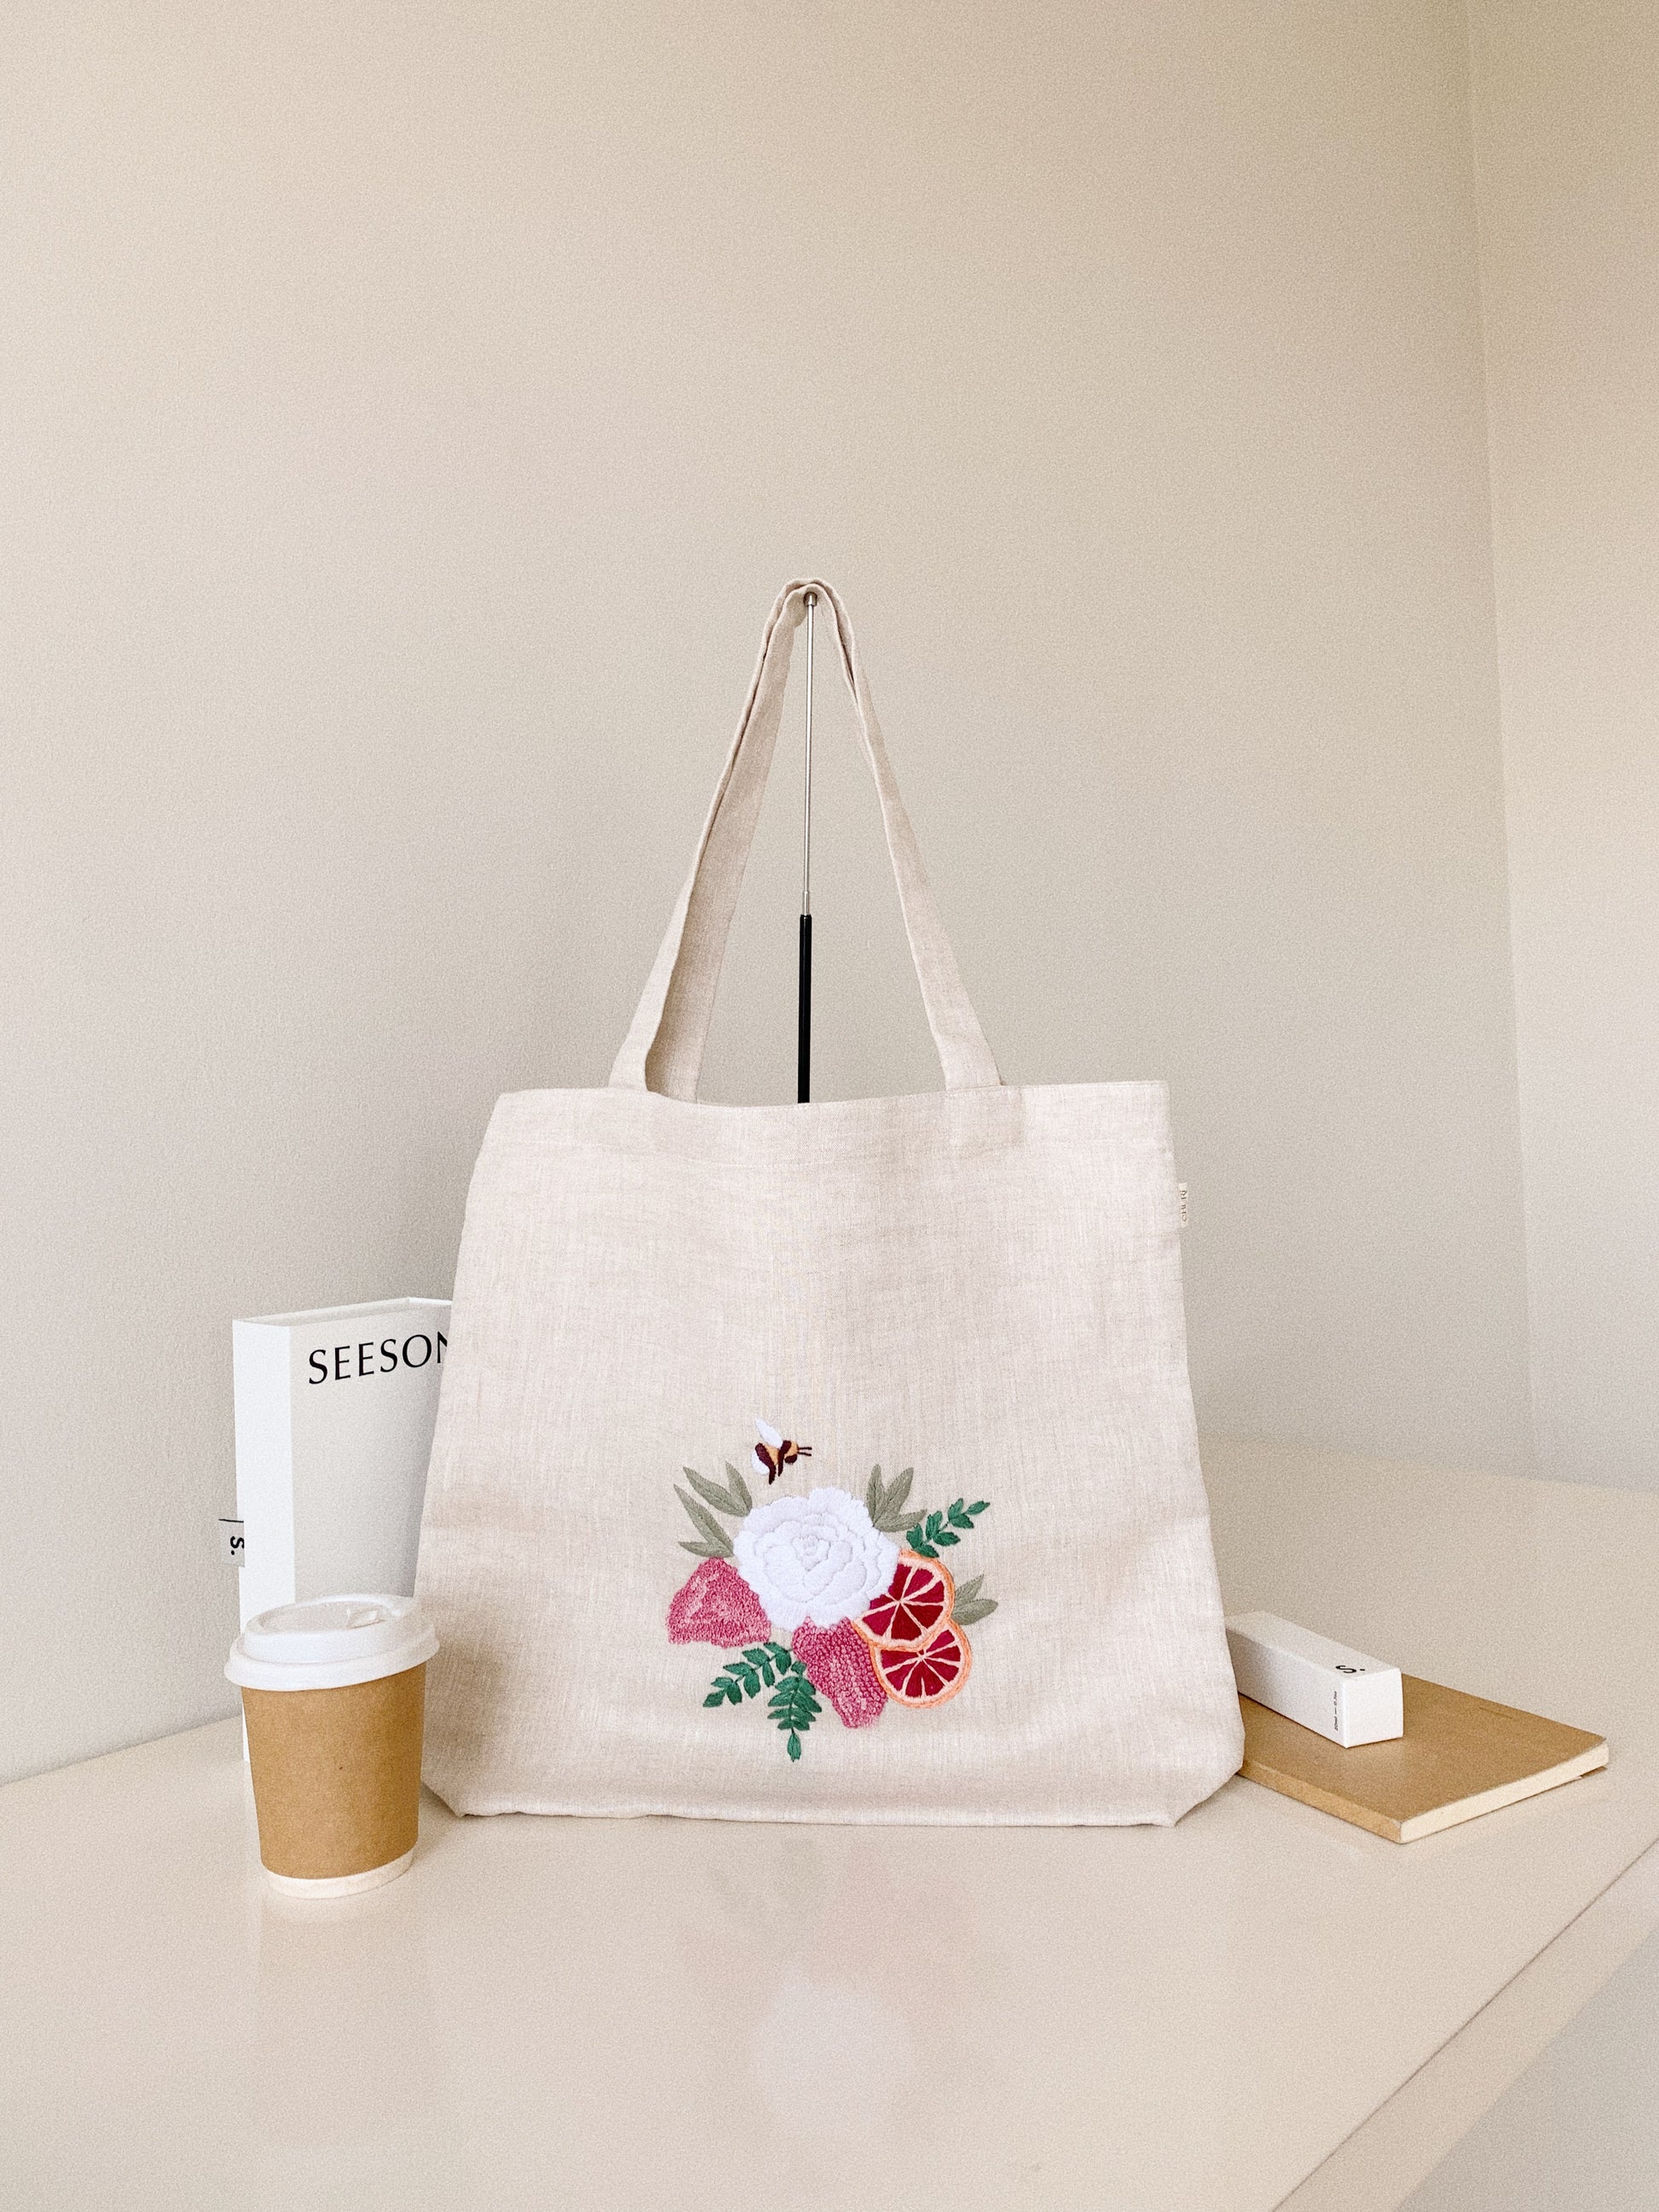 Hand embroidered linen tote bag with bee above a flower embroidery.